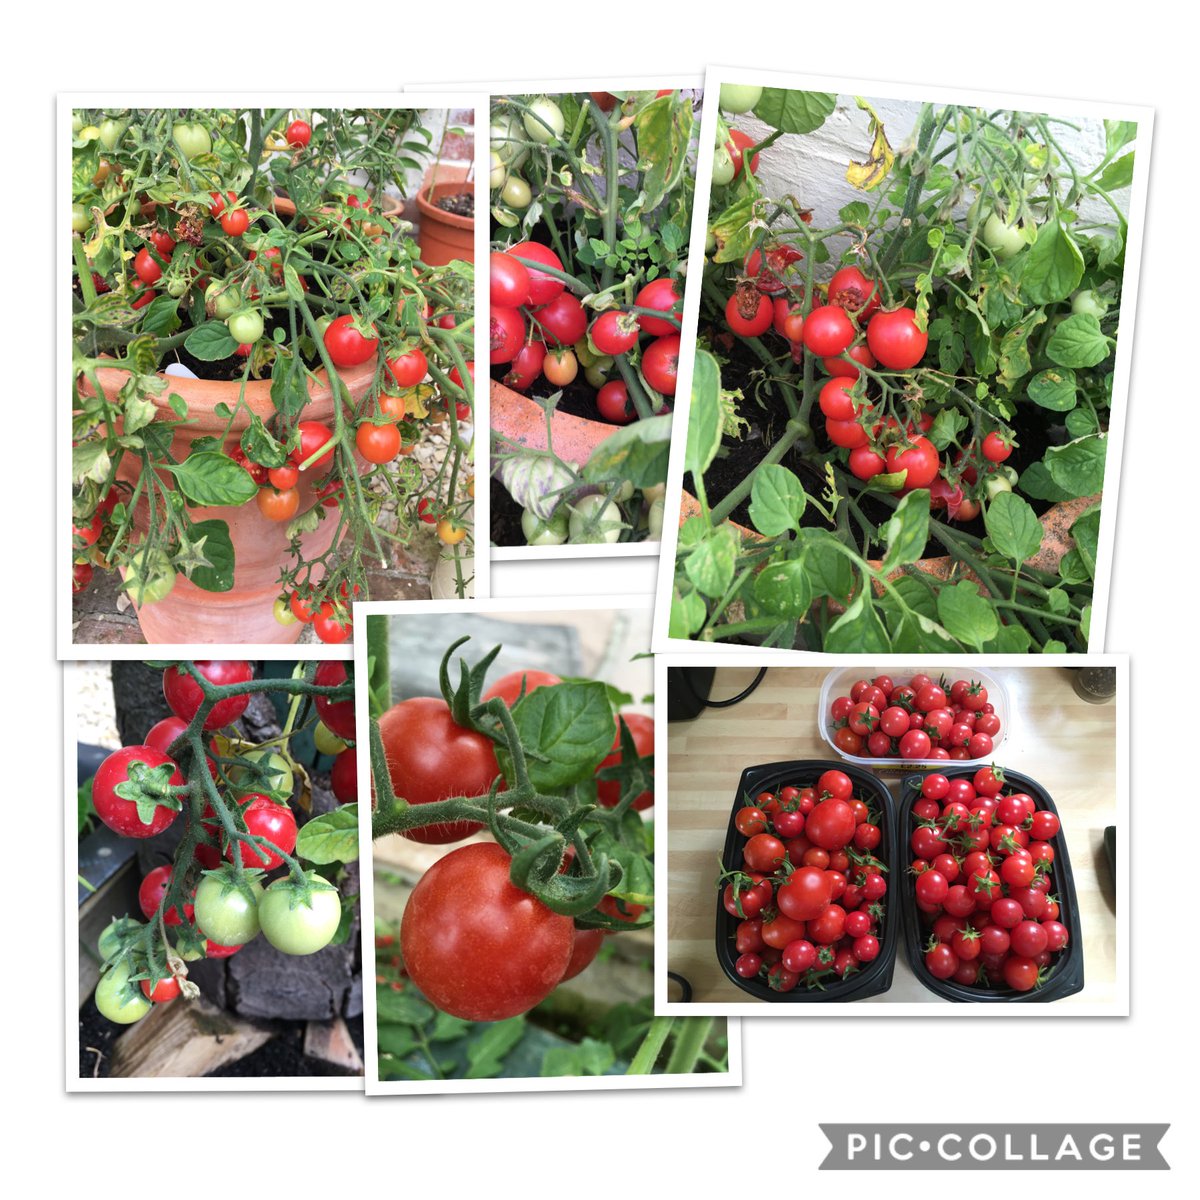 This week it’s all about Tomatoes! #sixonsaturday ⁦@mrfothergill⁩ #grownfromseed